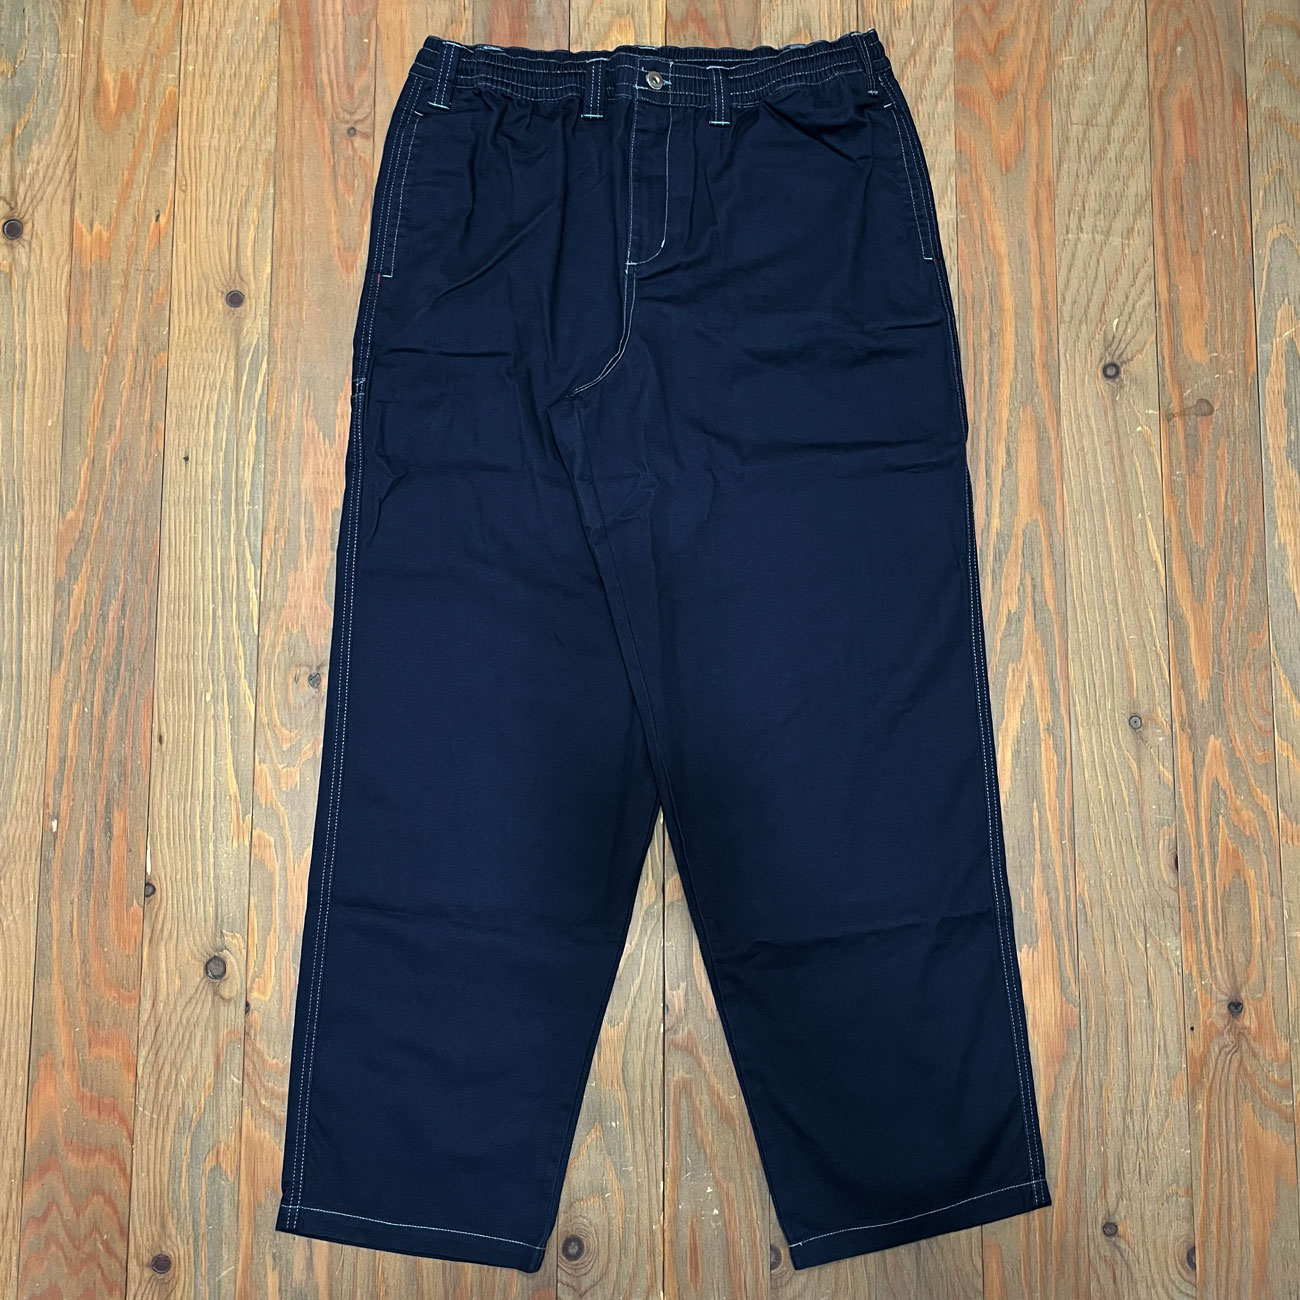 THEORIES STAMP LOUNGE PANTS NAVY CONTRAST STITCH